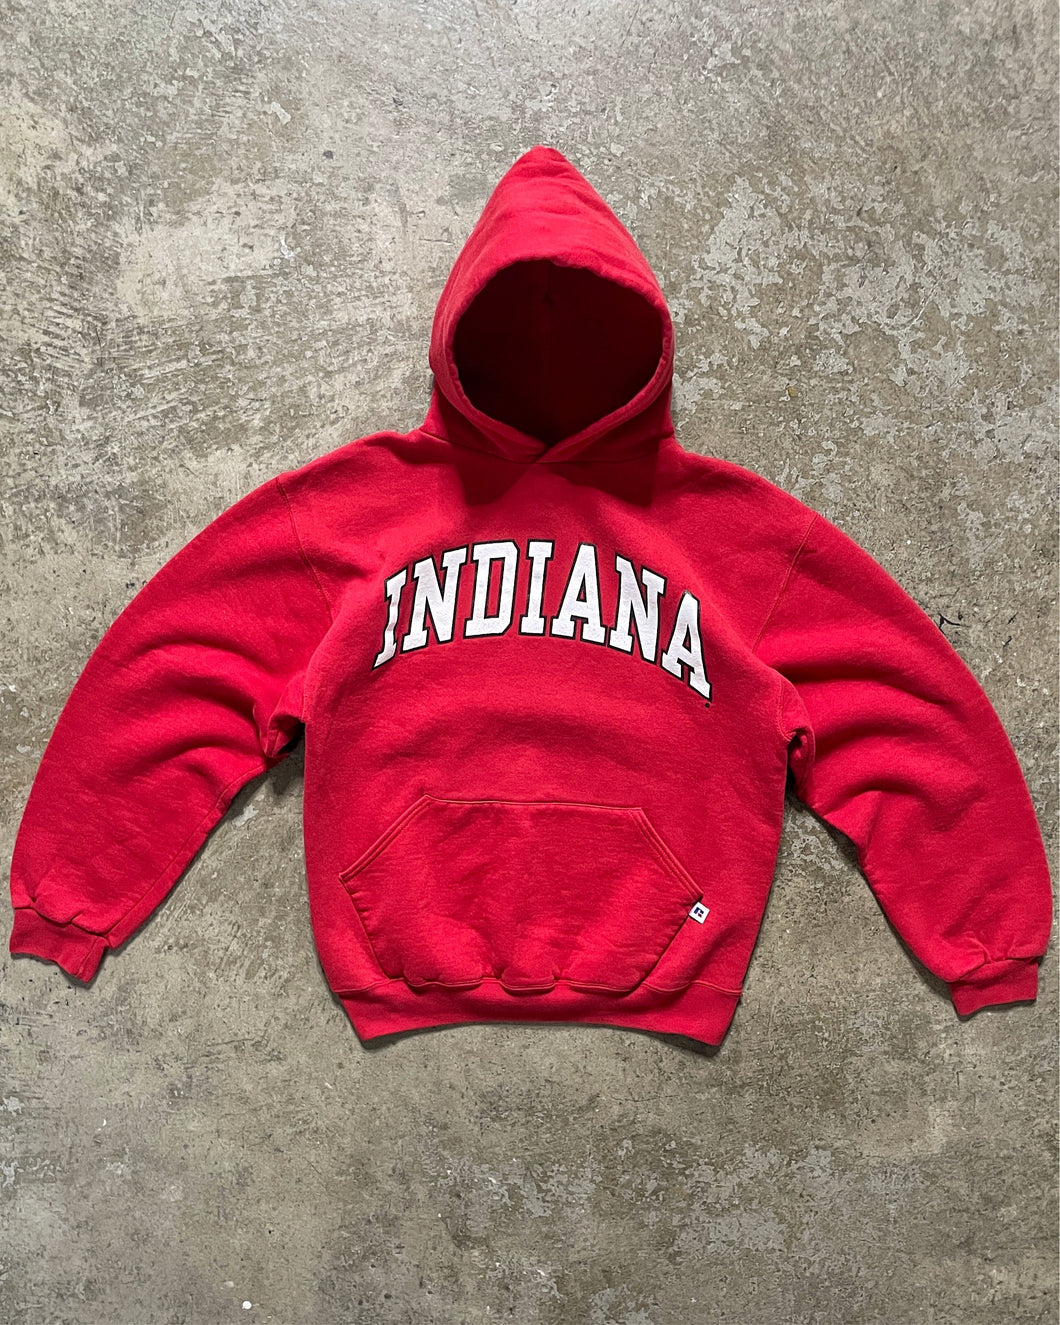 FADED RED “INDIANA” RUSSELL HOODIE - 1990S